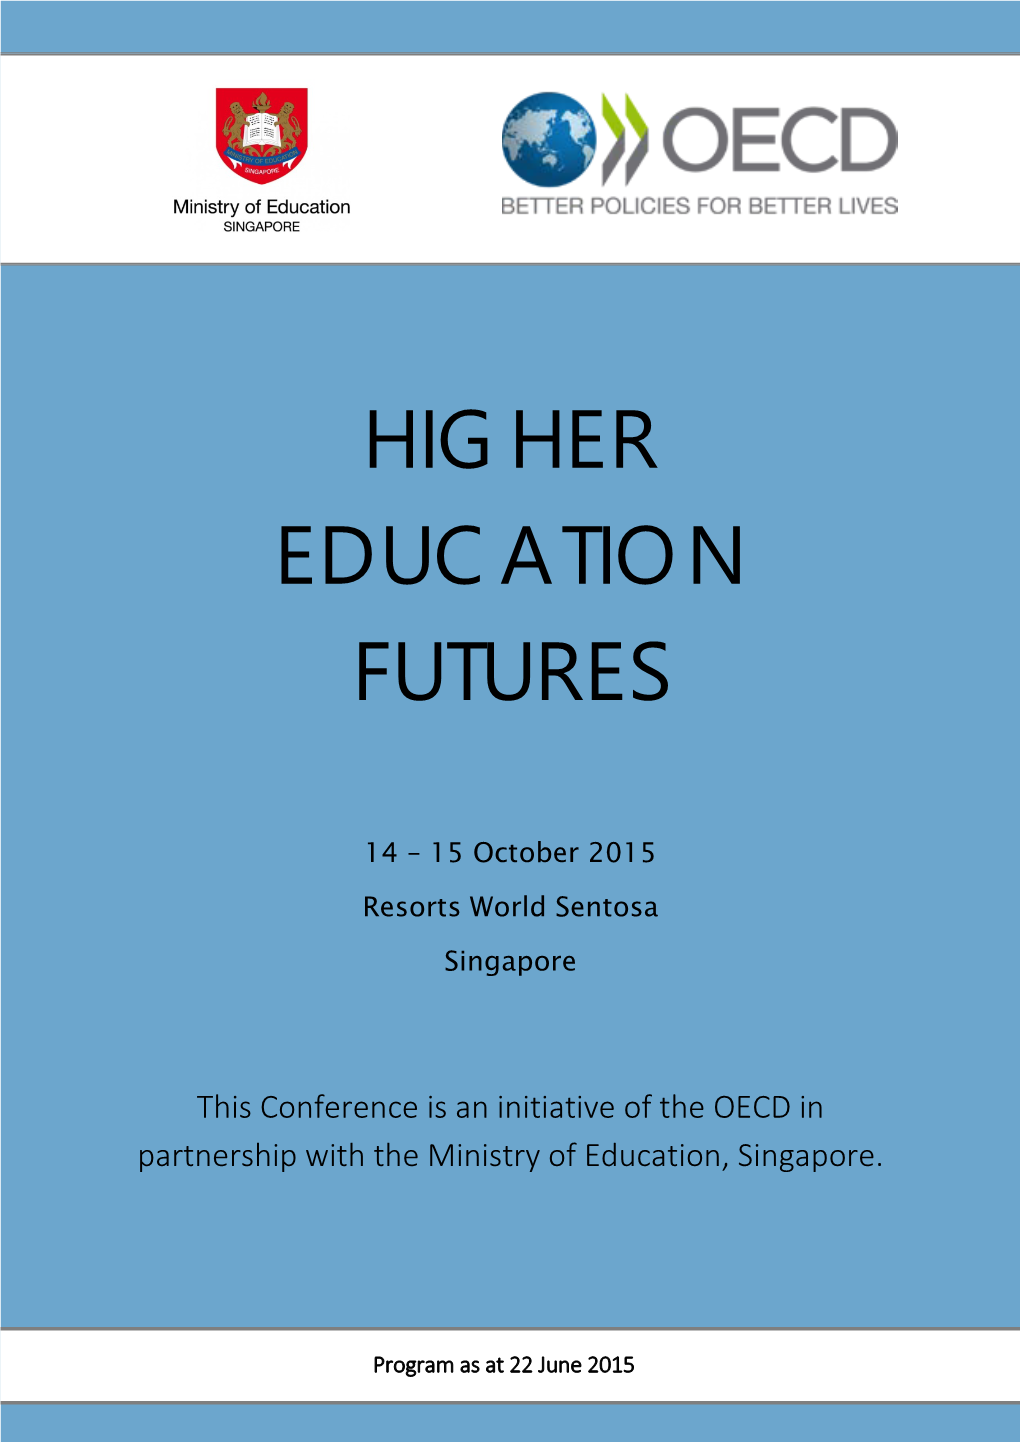 Higher Education Futures